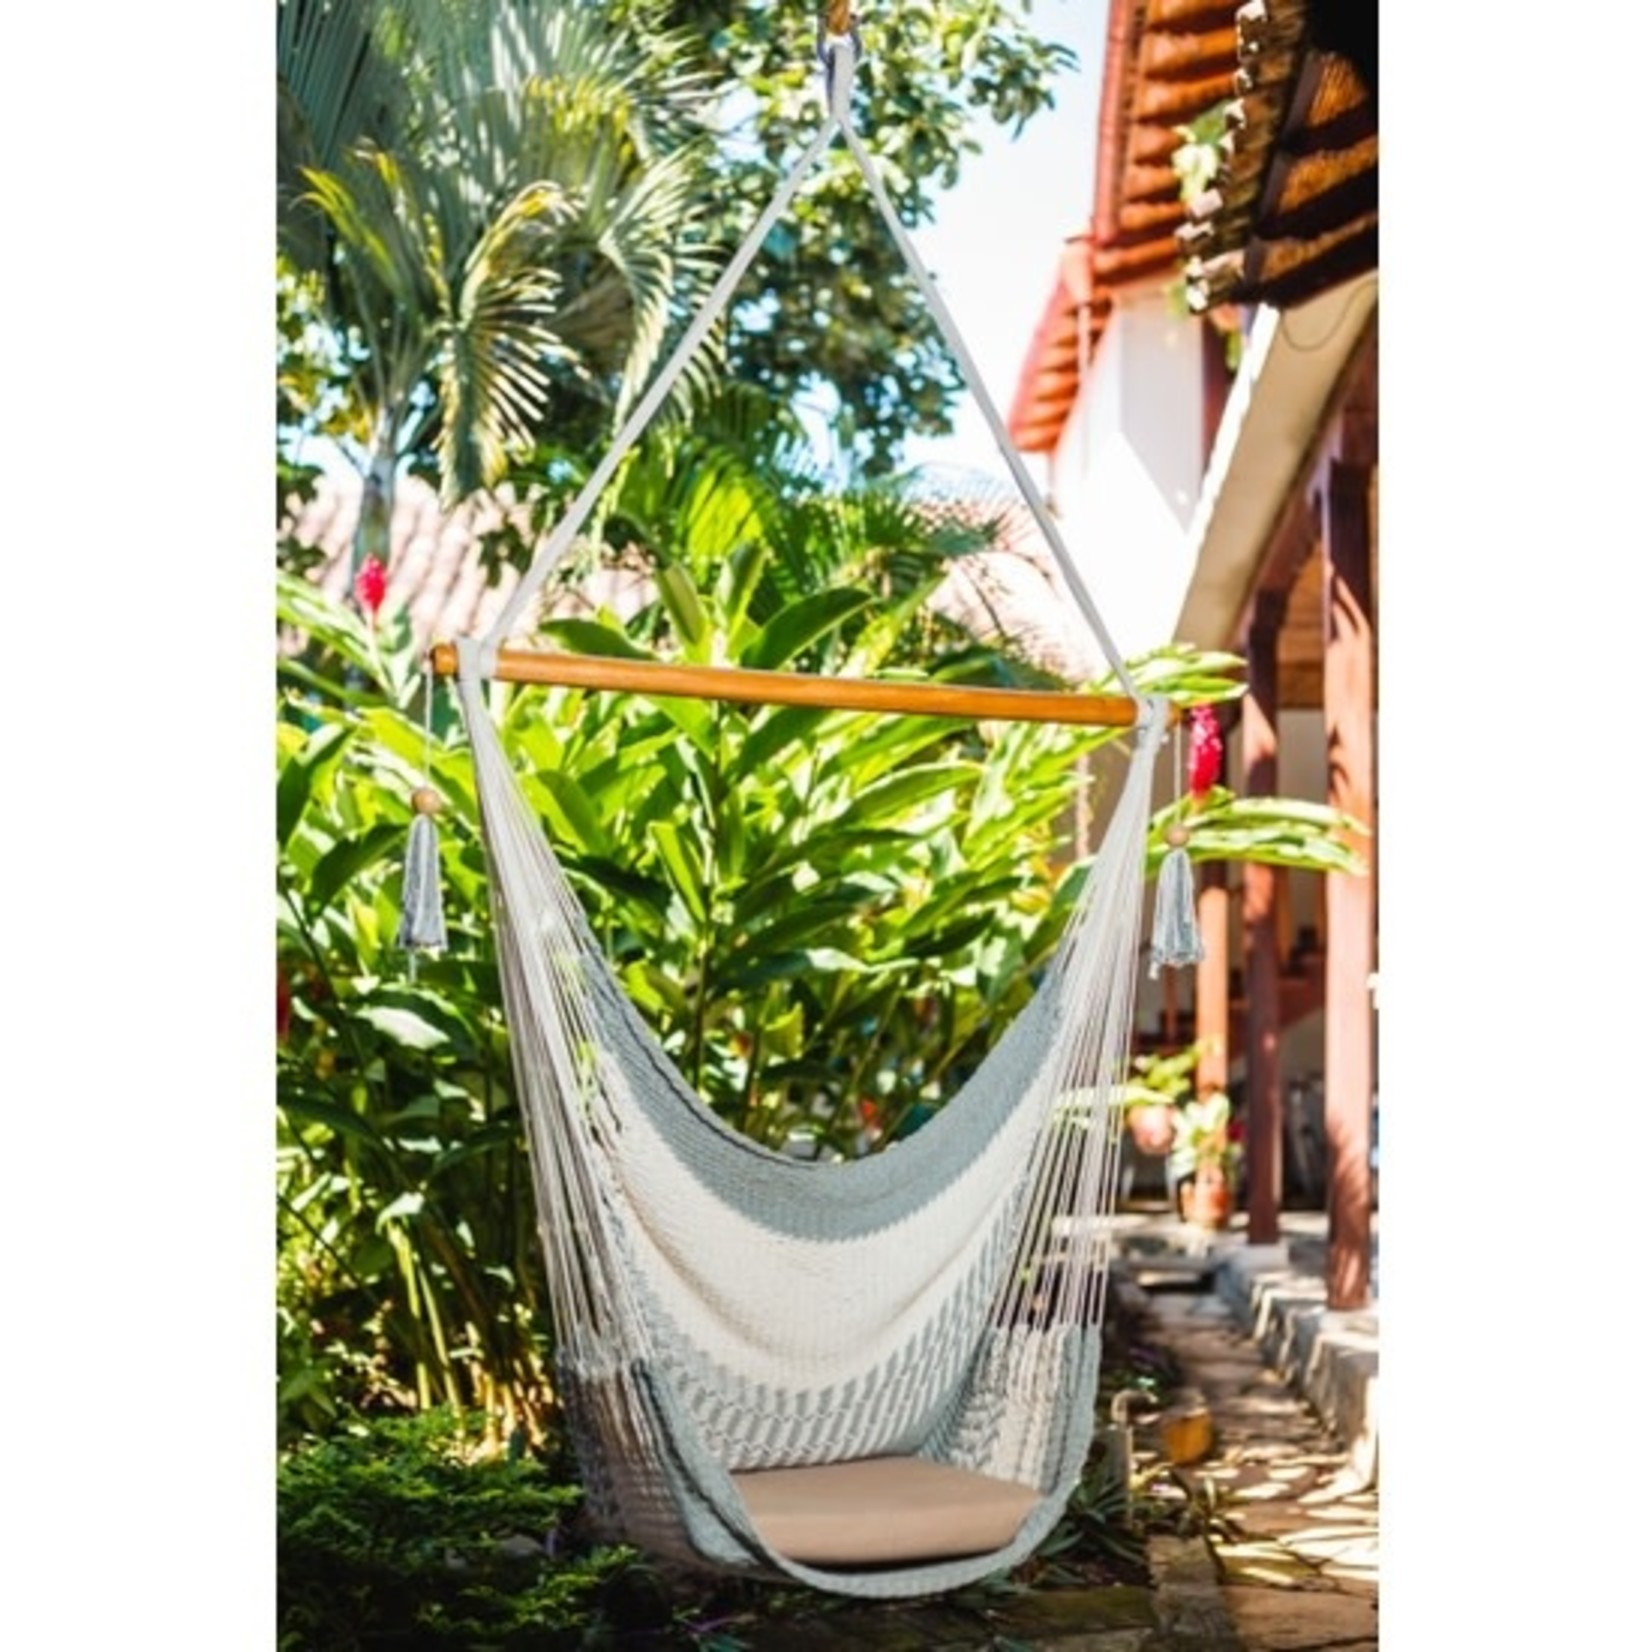 Women of the Cloud Forrest Handwoven Hammock Chair Gray and Cream, Nicaragua